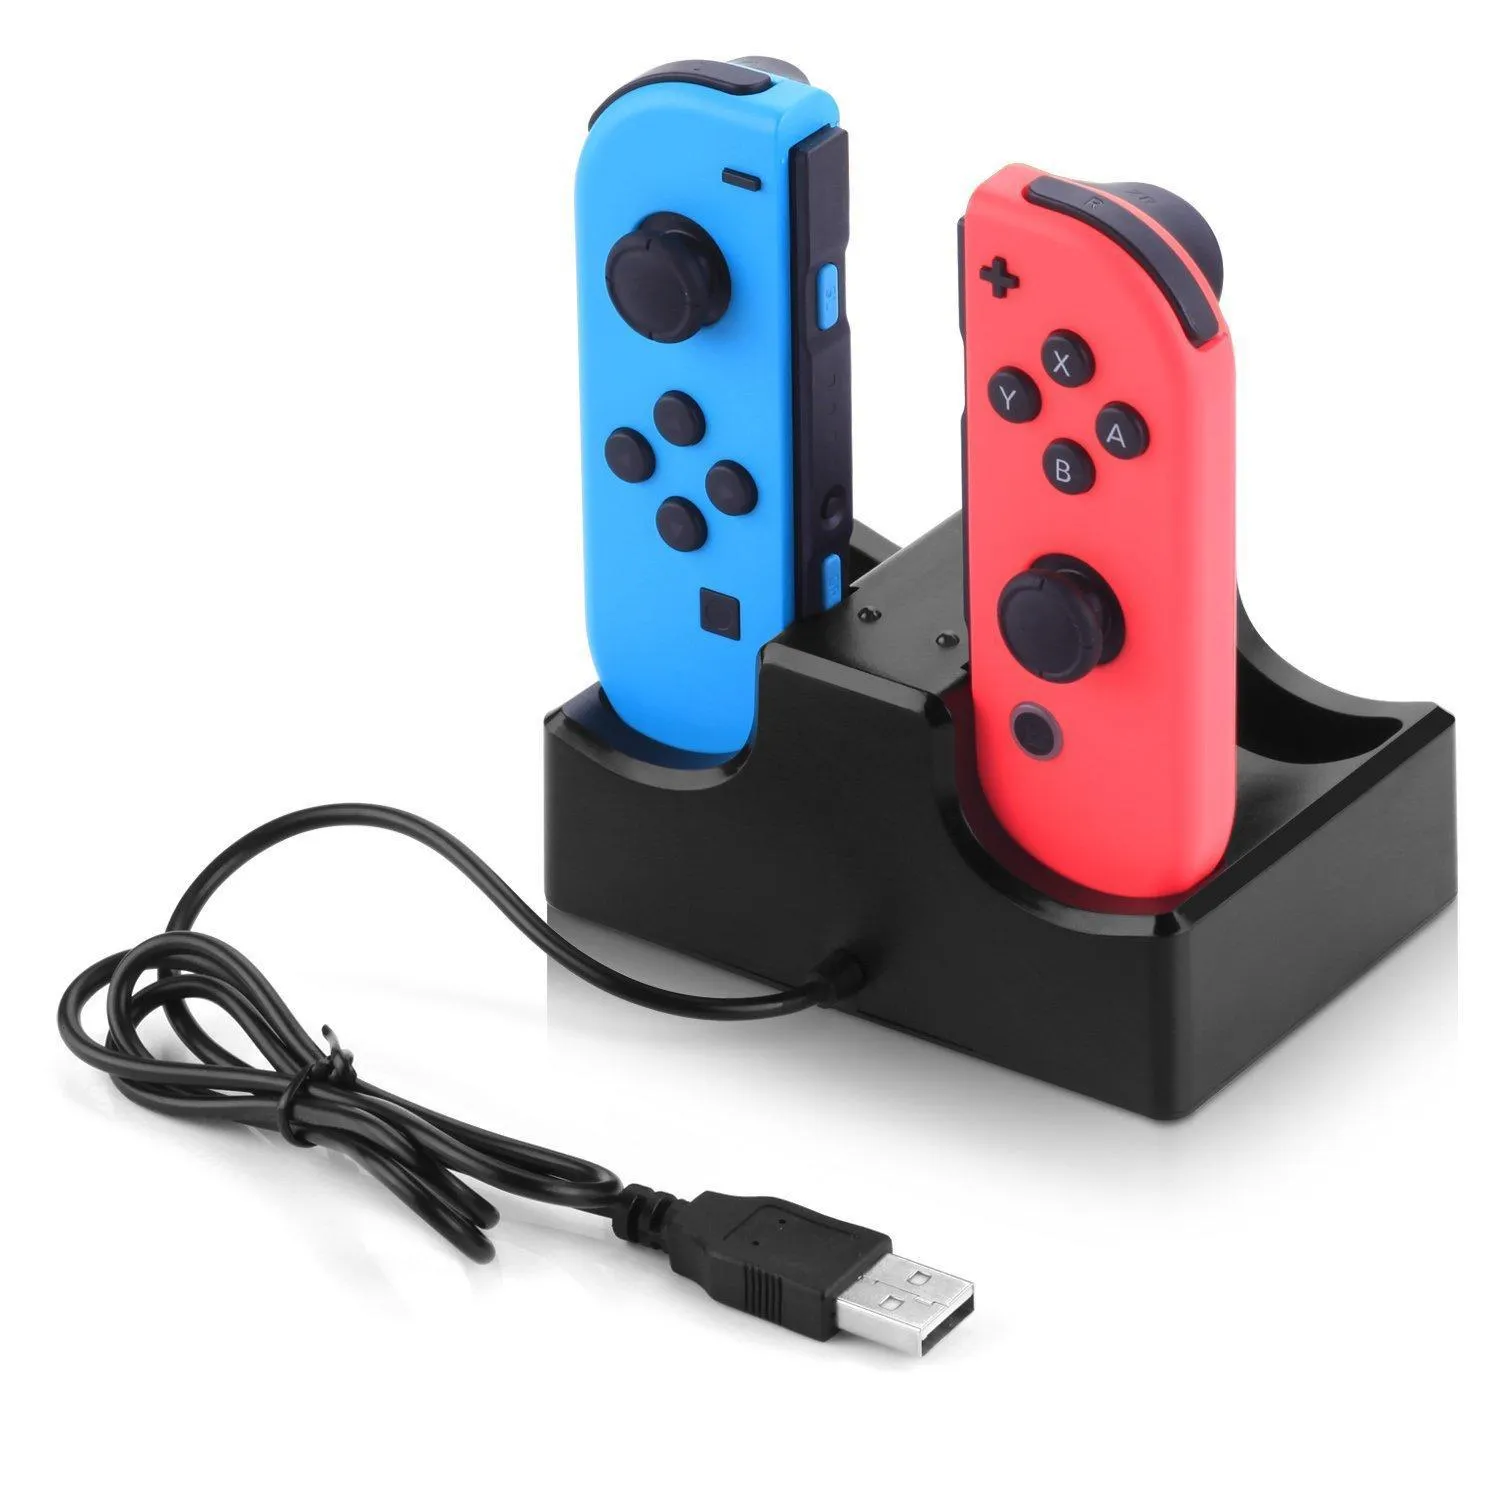 4 In 1 Charging Dock Station LED Charger Cradle For Nintendo Switch 4 Joy-Con Controllers Nintend Switch NS Charging Stand 1pcs/lot